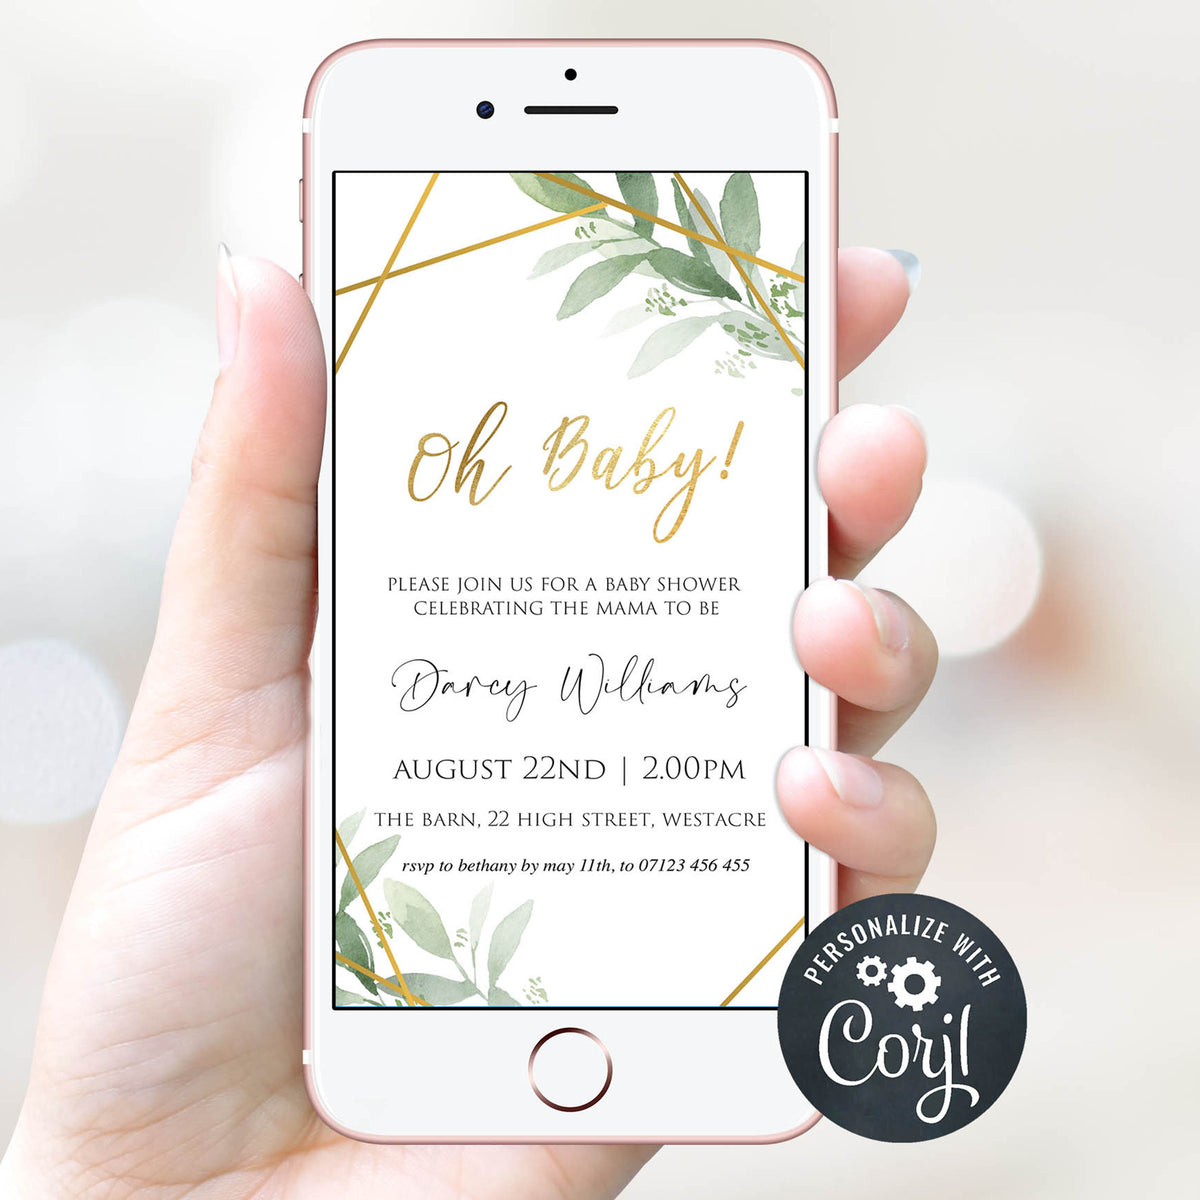 editable oh baby baby shower invite, gold geometric baby shower invitations, editable baby shower invites, mobile baby shower invites, gold baby shower theme